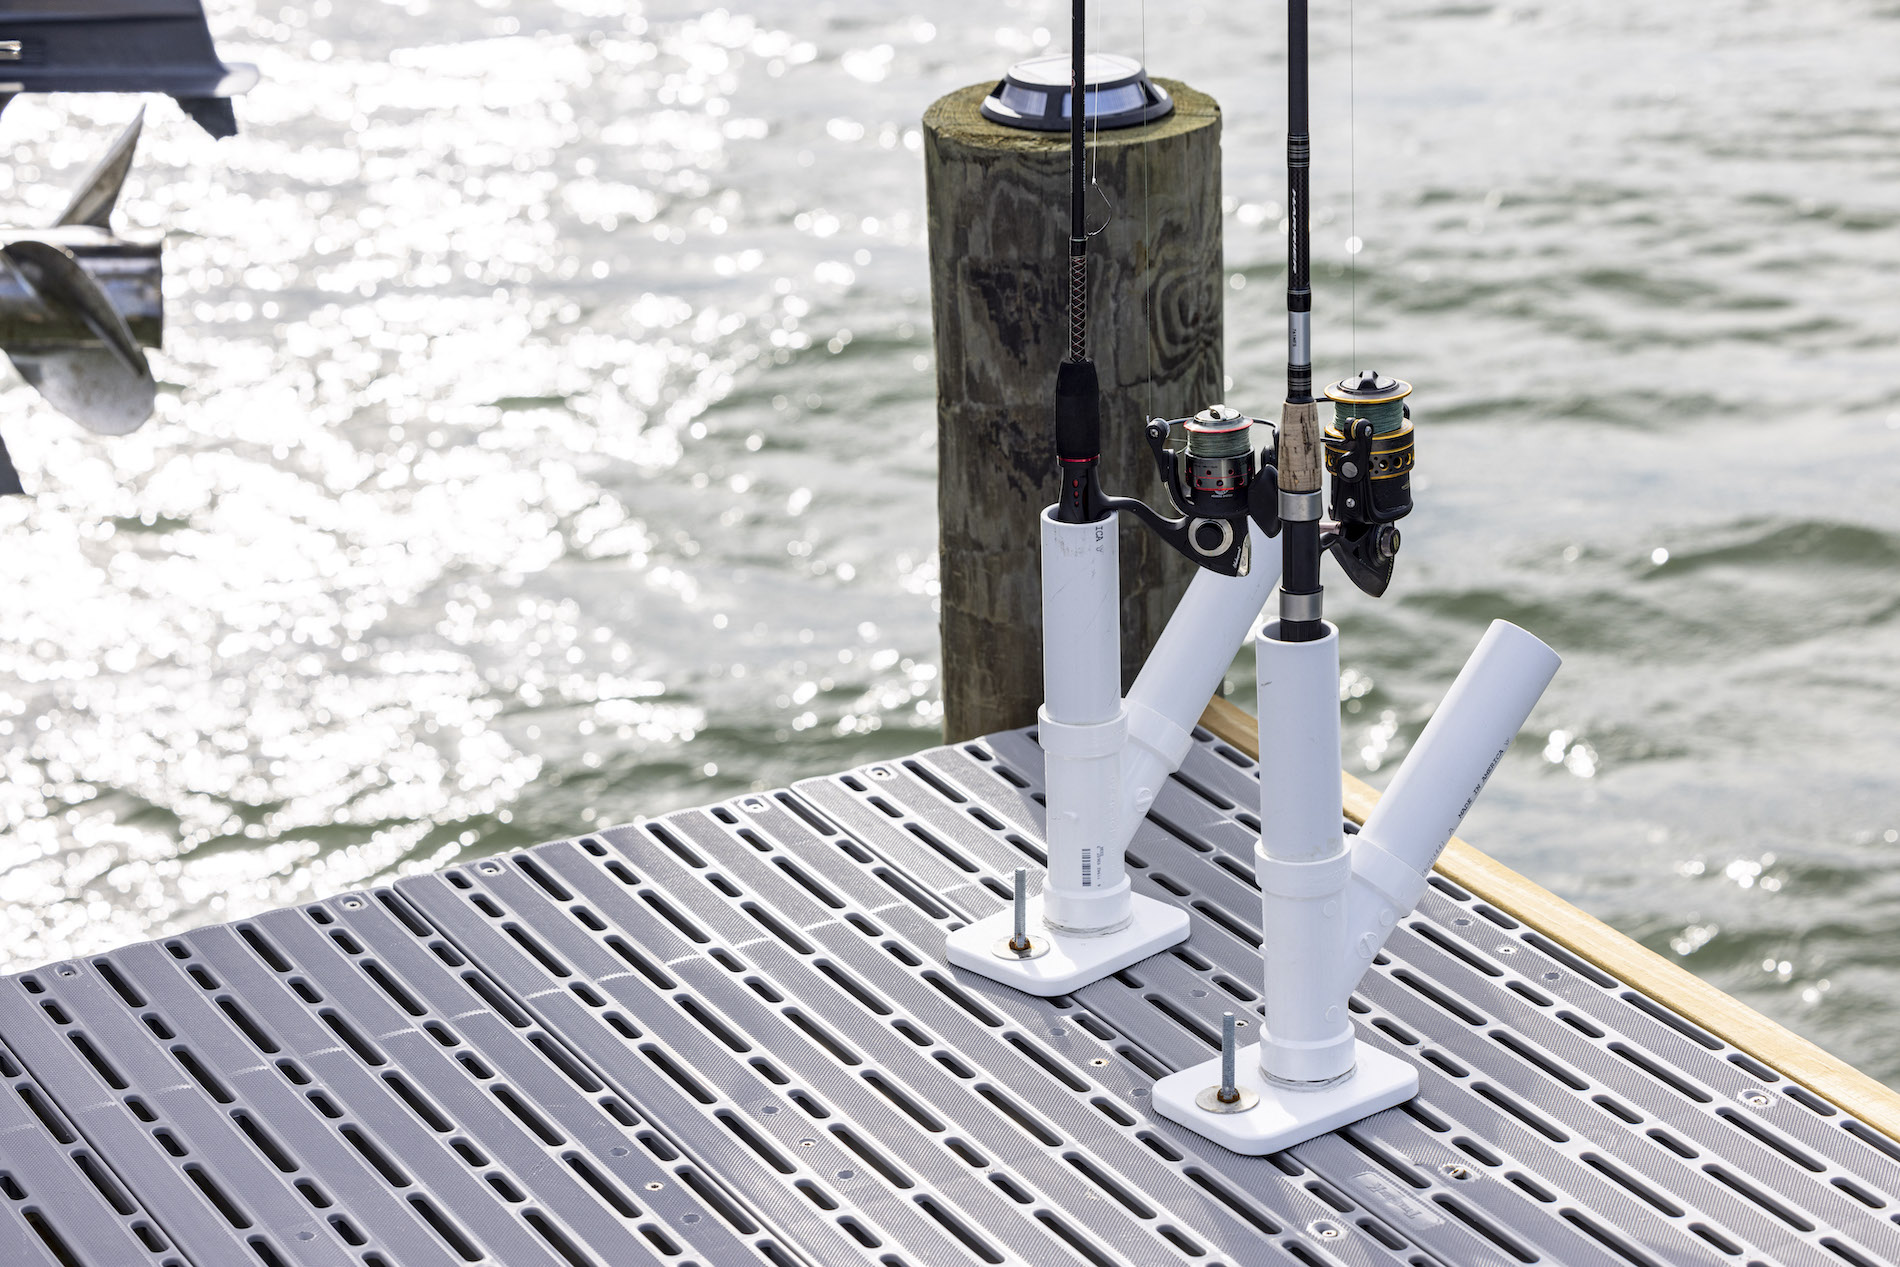 Fishing rod holders mounted onto Titan classic boards applied to a wood deck frame over the ocean.